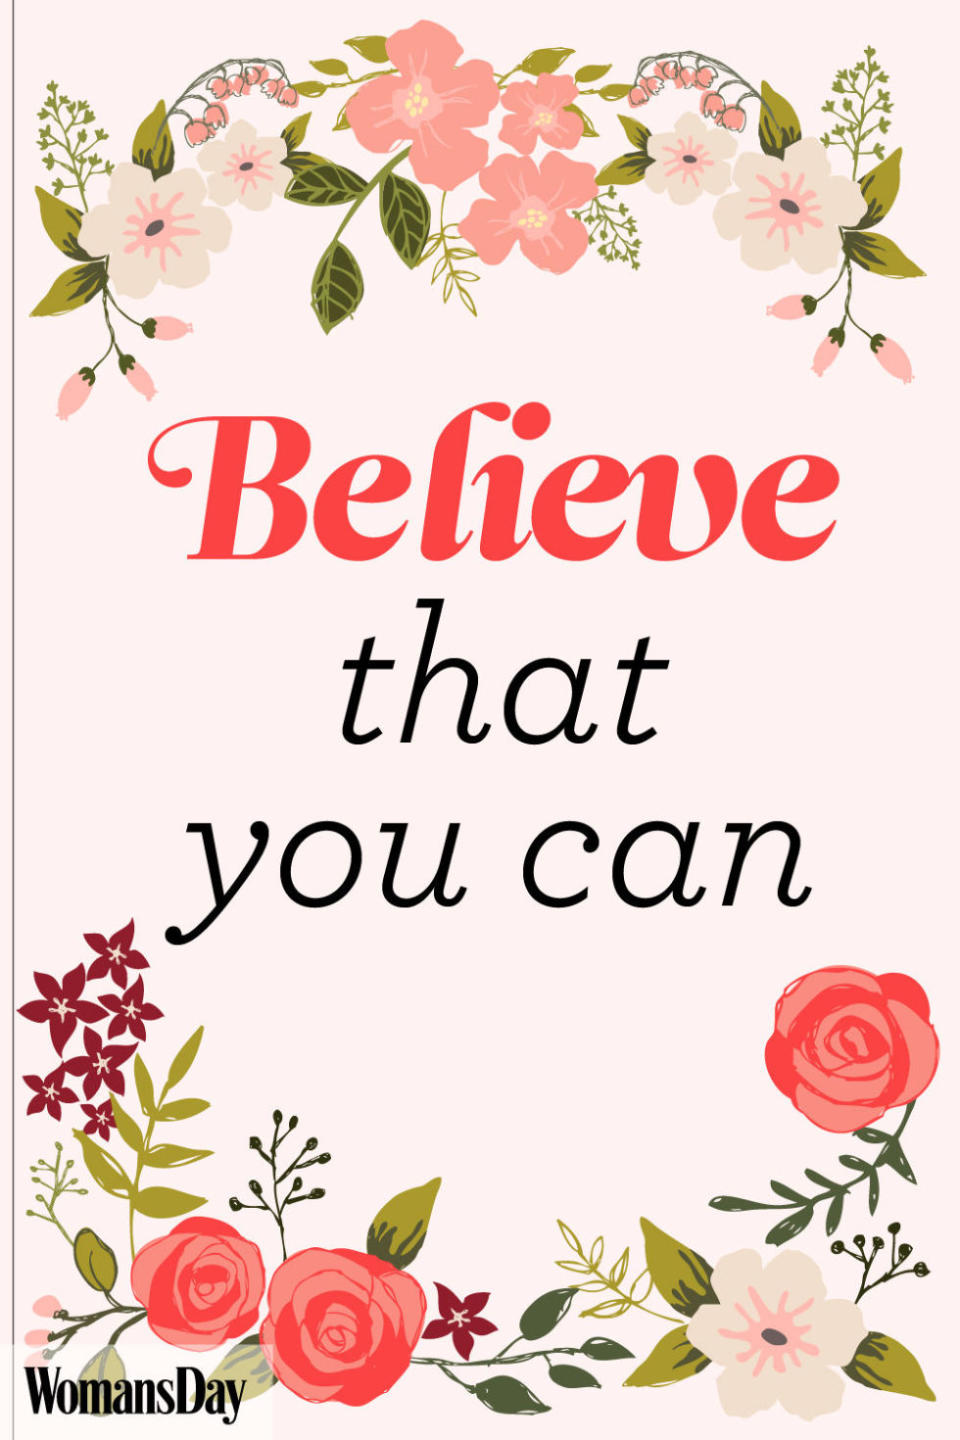 Believe that you can.